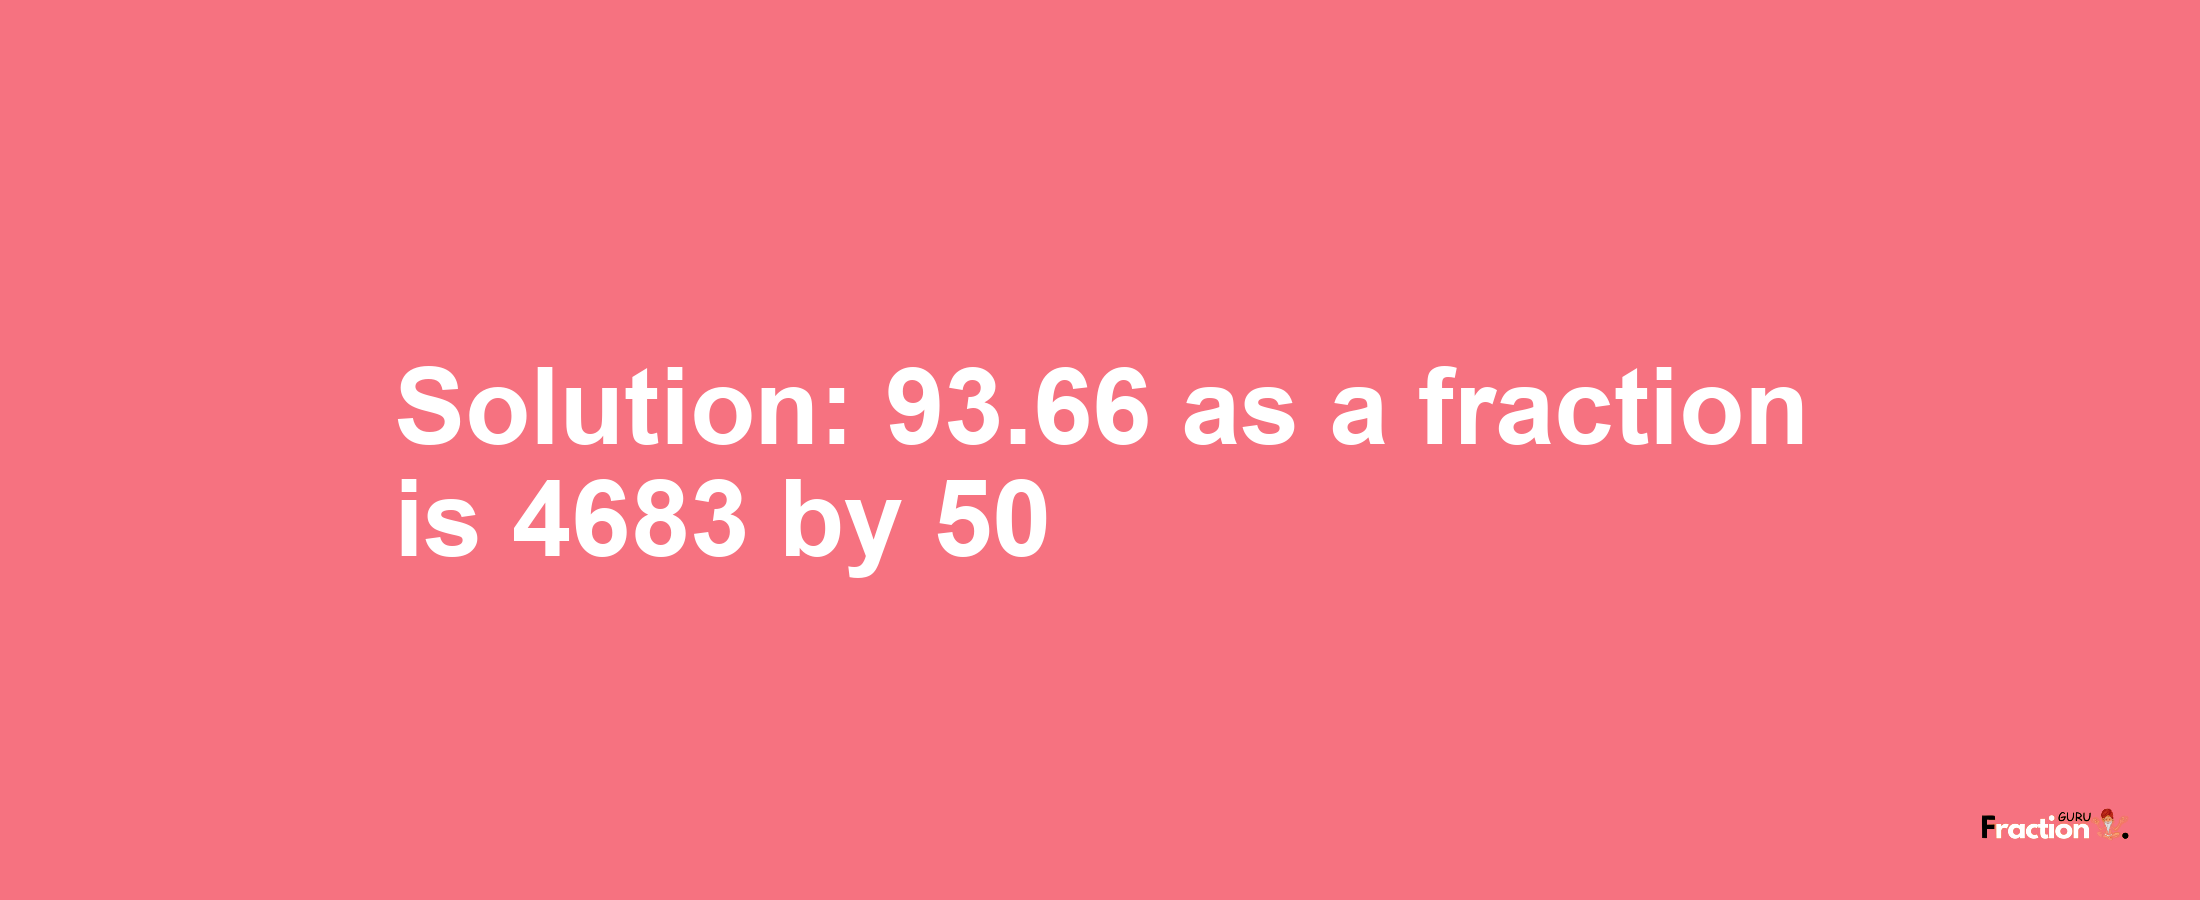 Solution:93.66 as a fraction is 4683/50